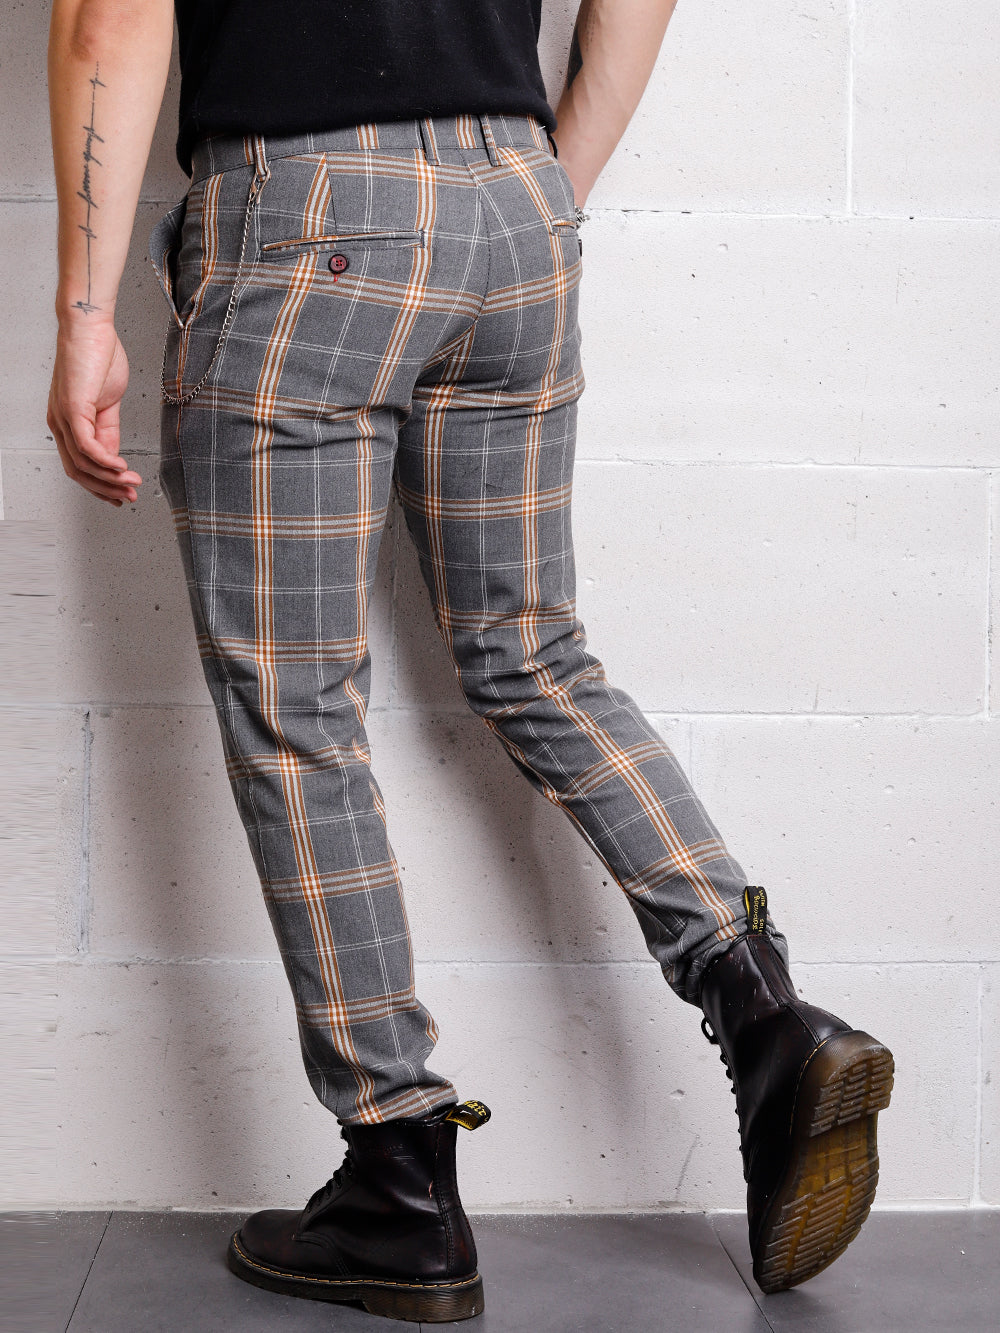 A man is leaning against a wall wearing CHECKERED STONE pants.